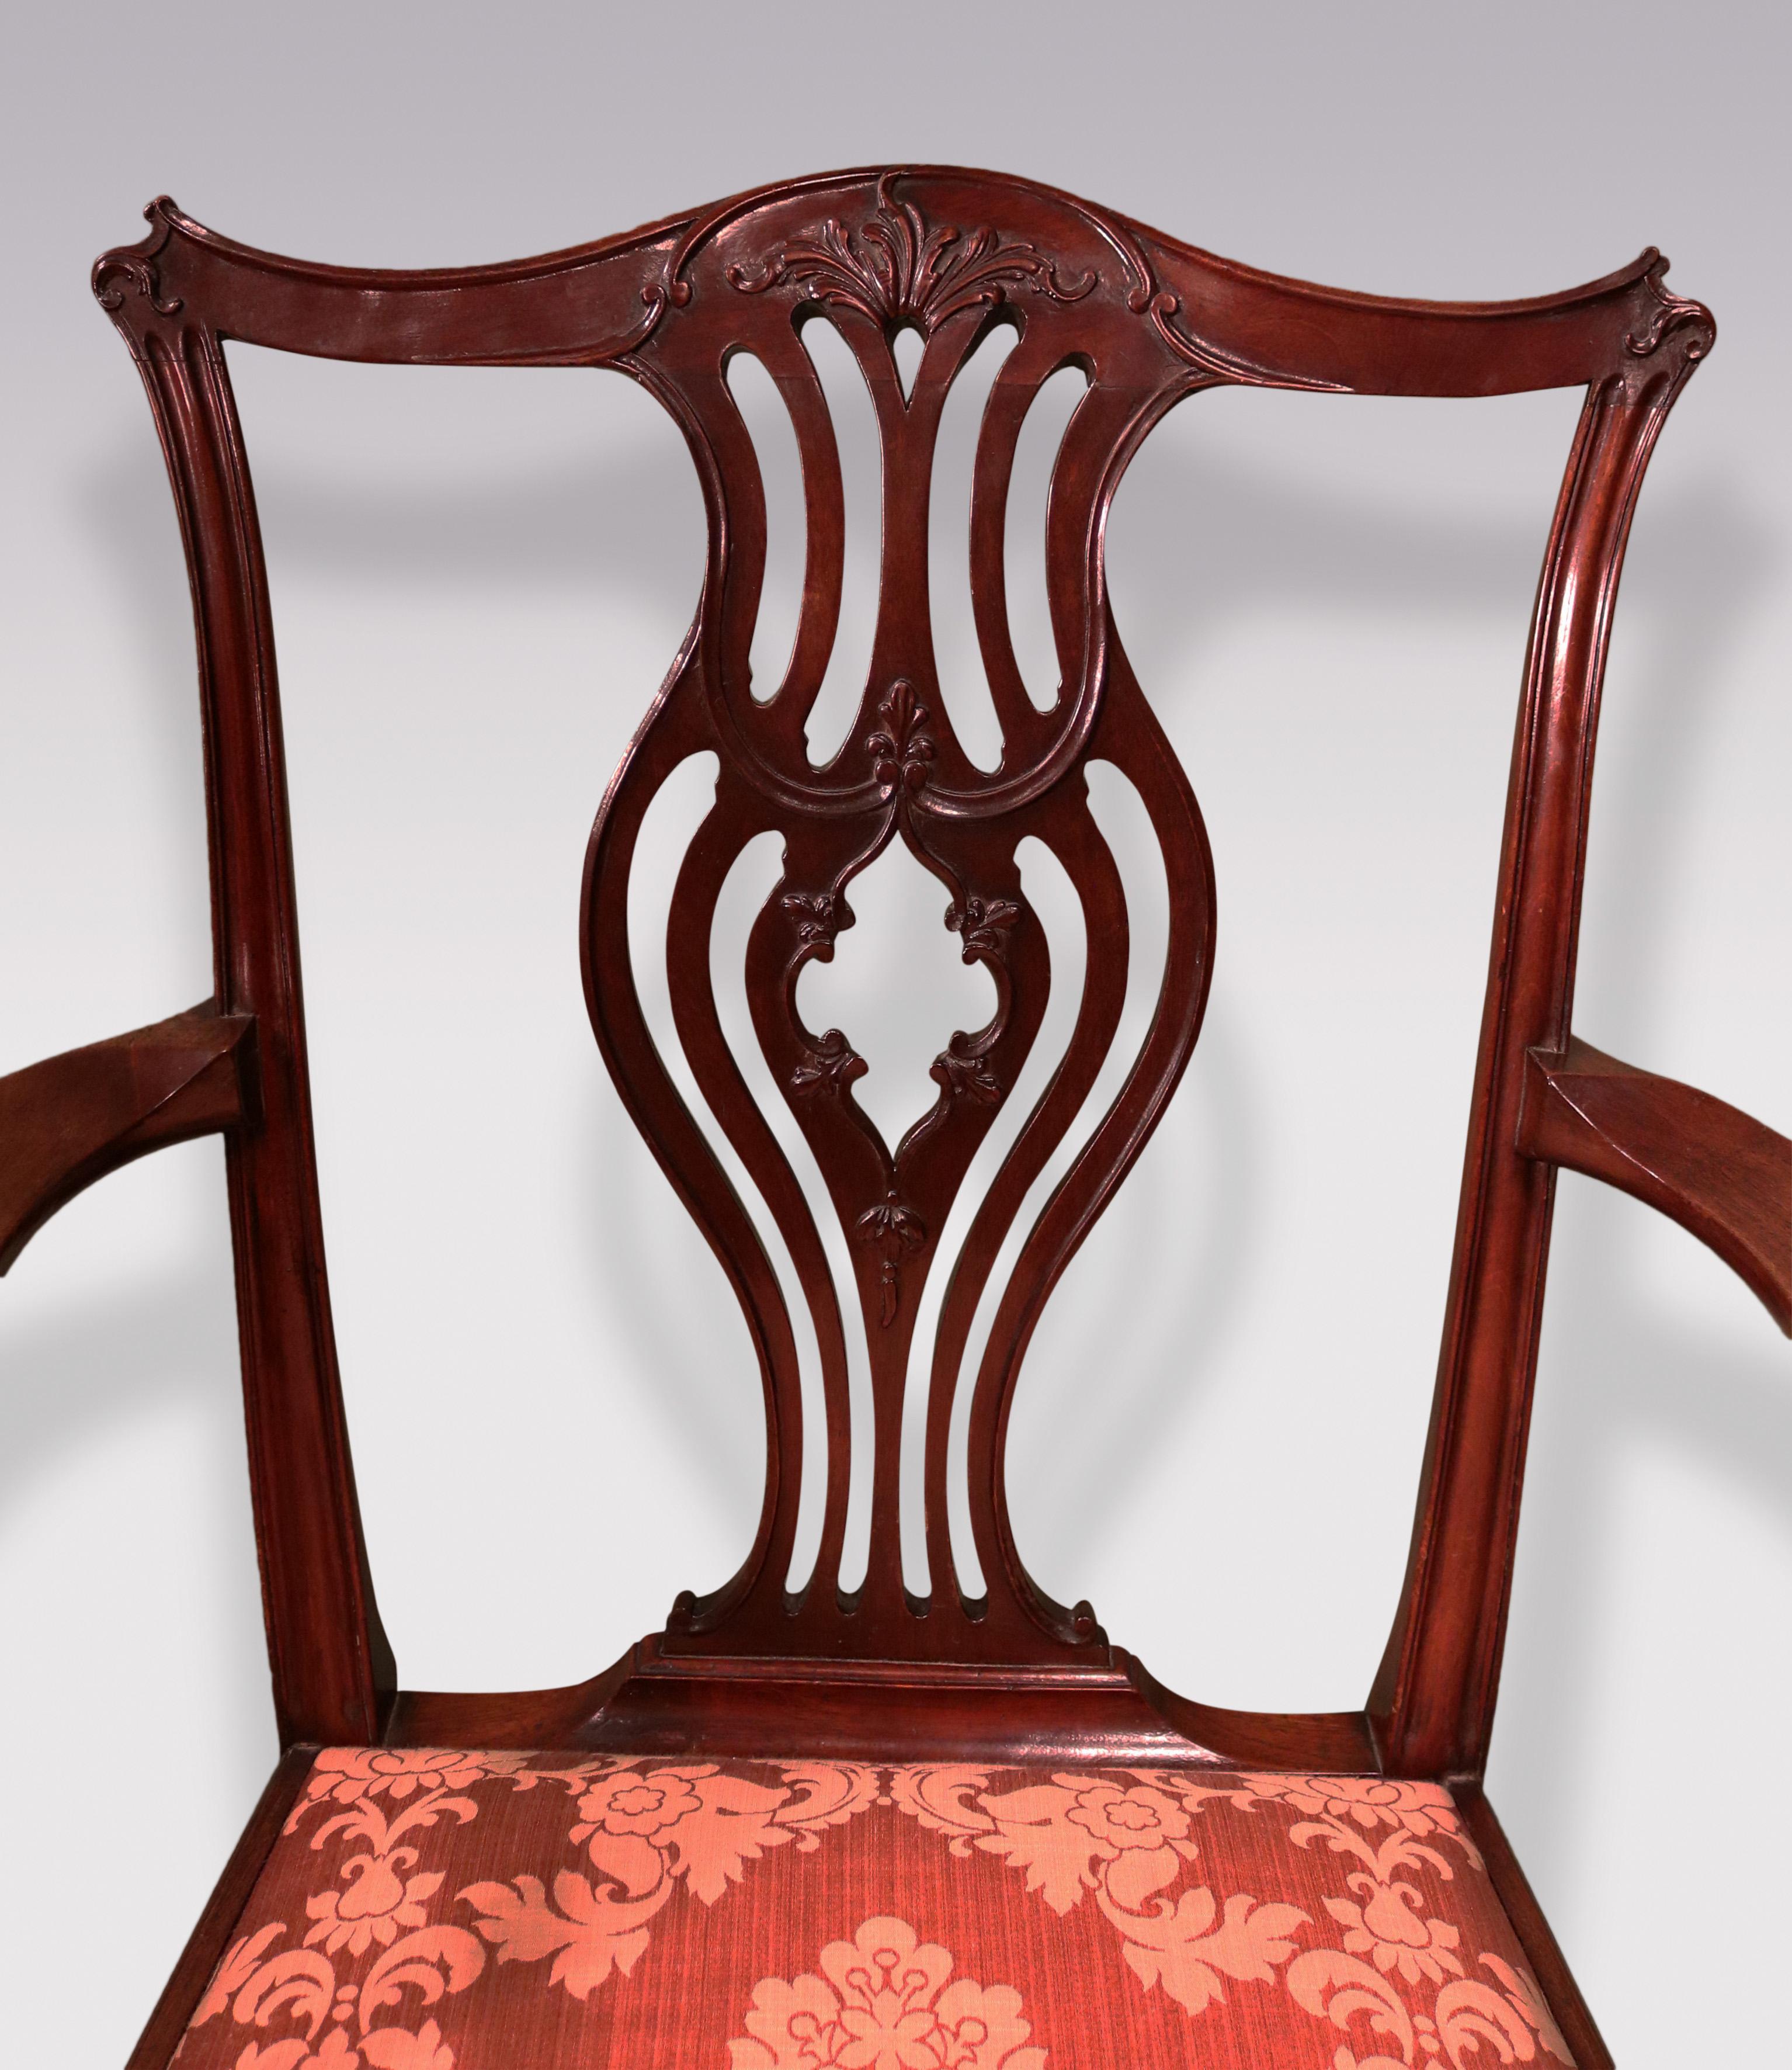 A mid-18th Century Chippendale period mahogany Armchair having serpentine top-rail with pierced & carved central splat with setback moulded arms and drop-in seat supported on chamfered legs with “H” stretcher.